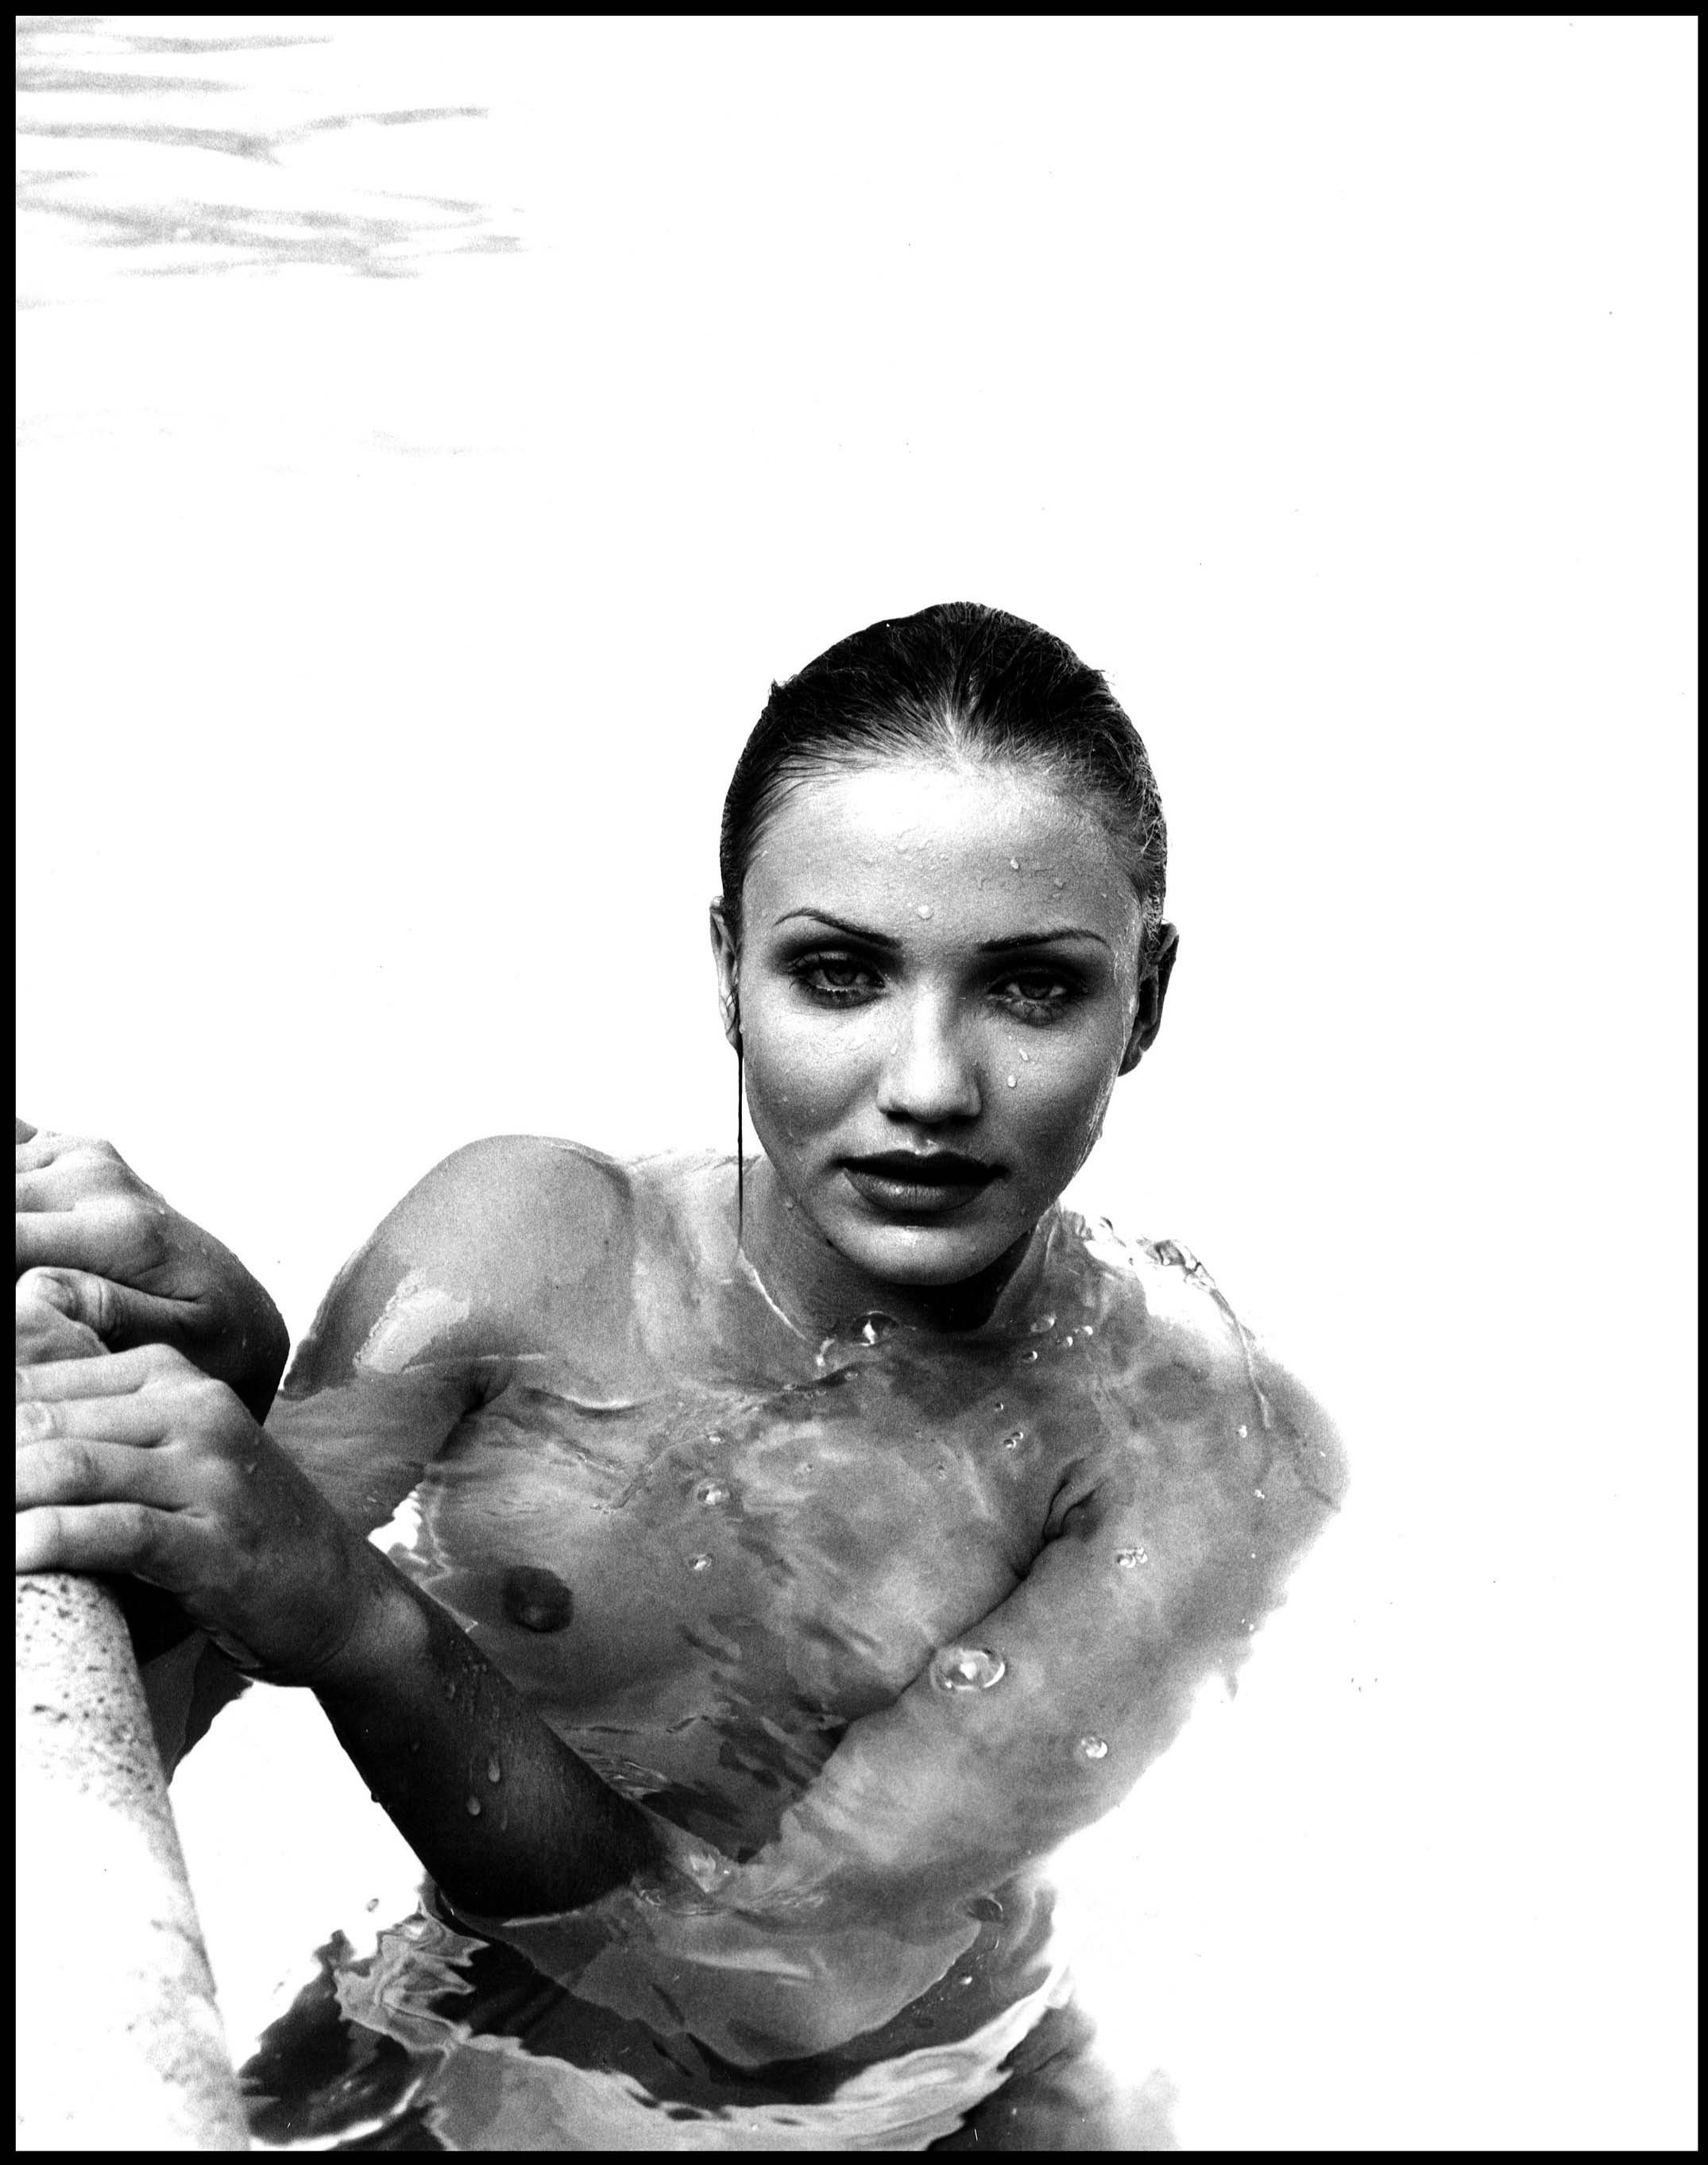 55400_Cameron_Diaz_-_Topless_photoshoot_in_a_swimming_pool0007_123_539lo.jpg